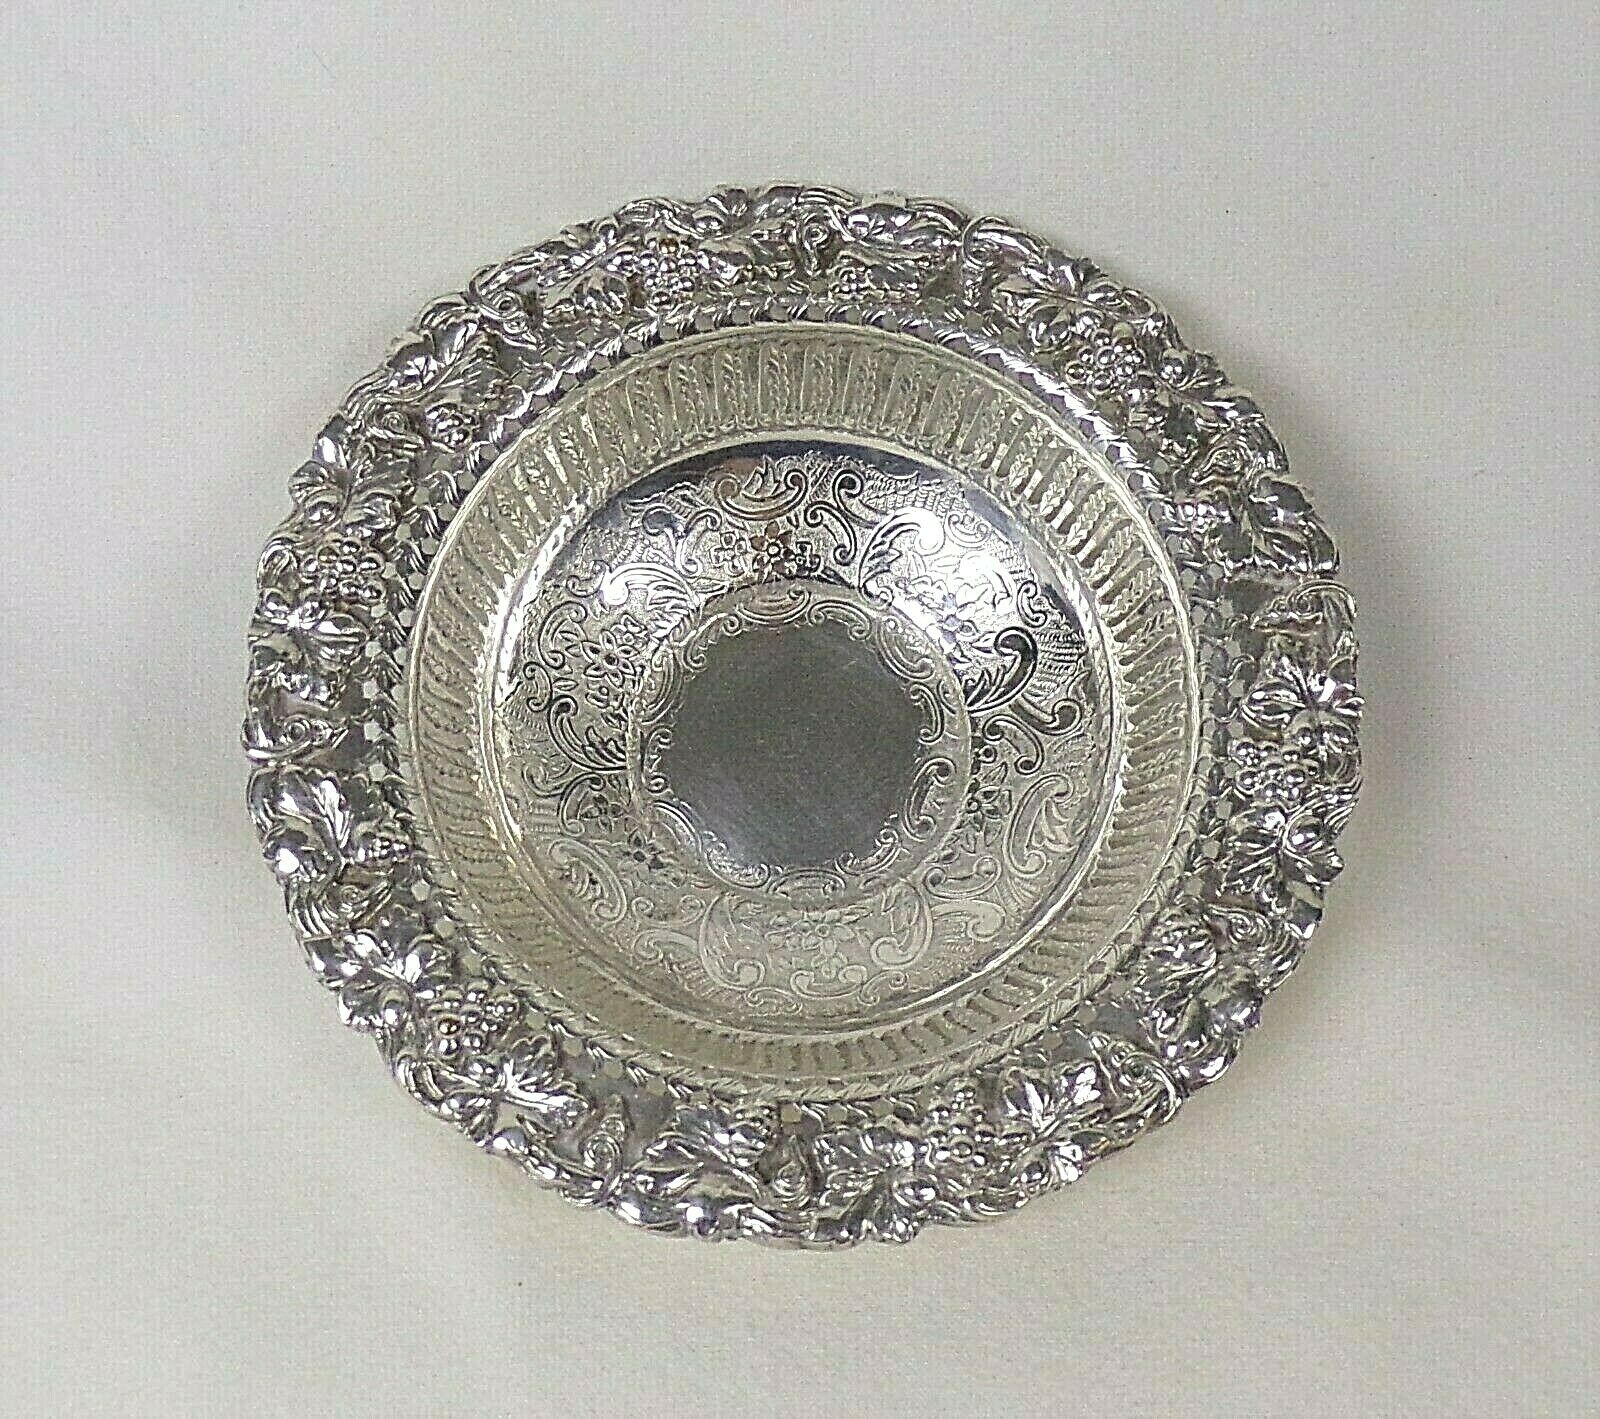 Sheffield Reproductions 6" Bowl Silverplated Reticulated Grapes Vines   <b>